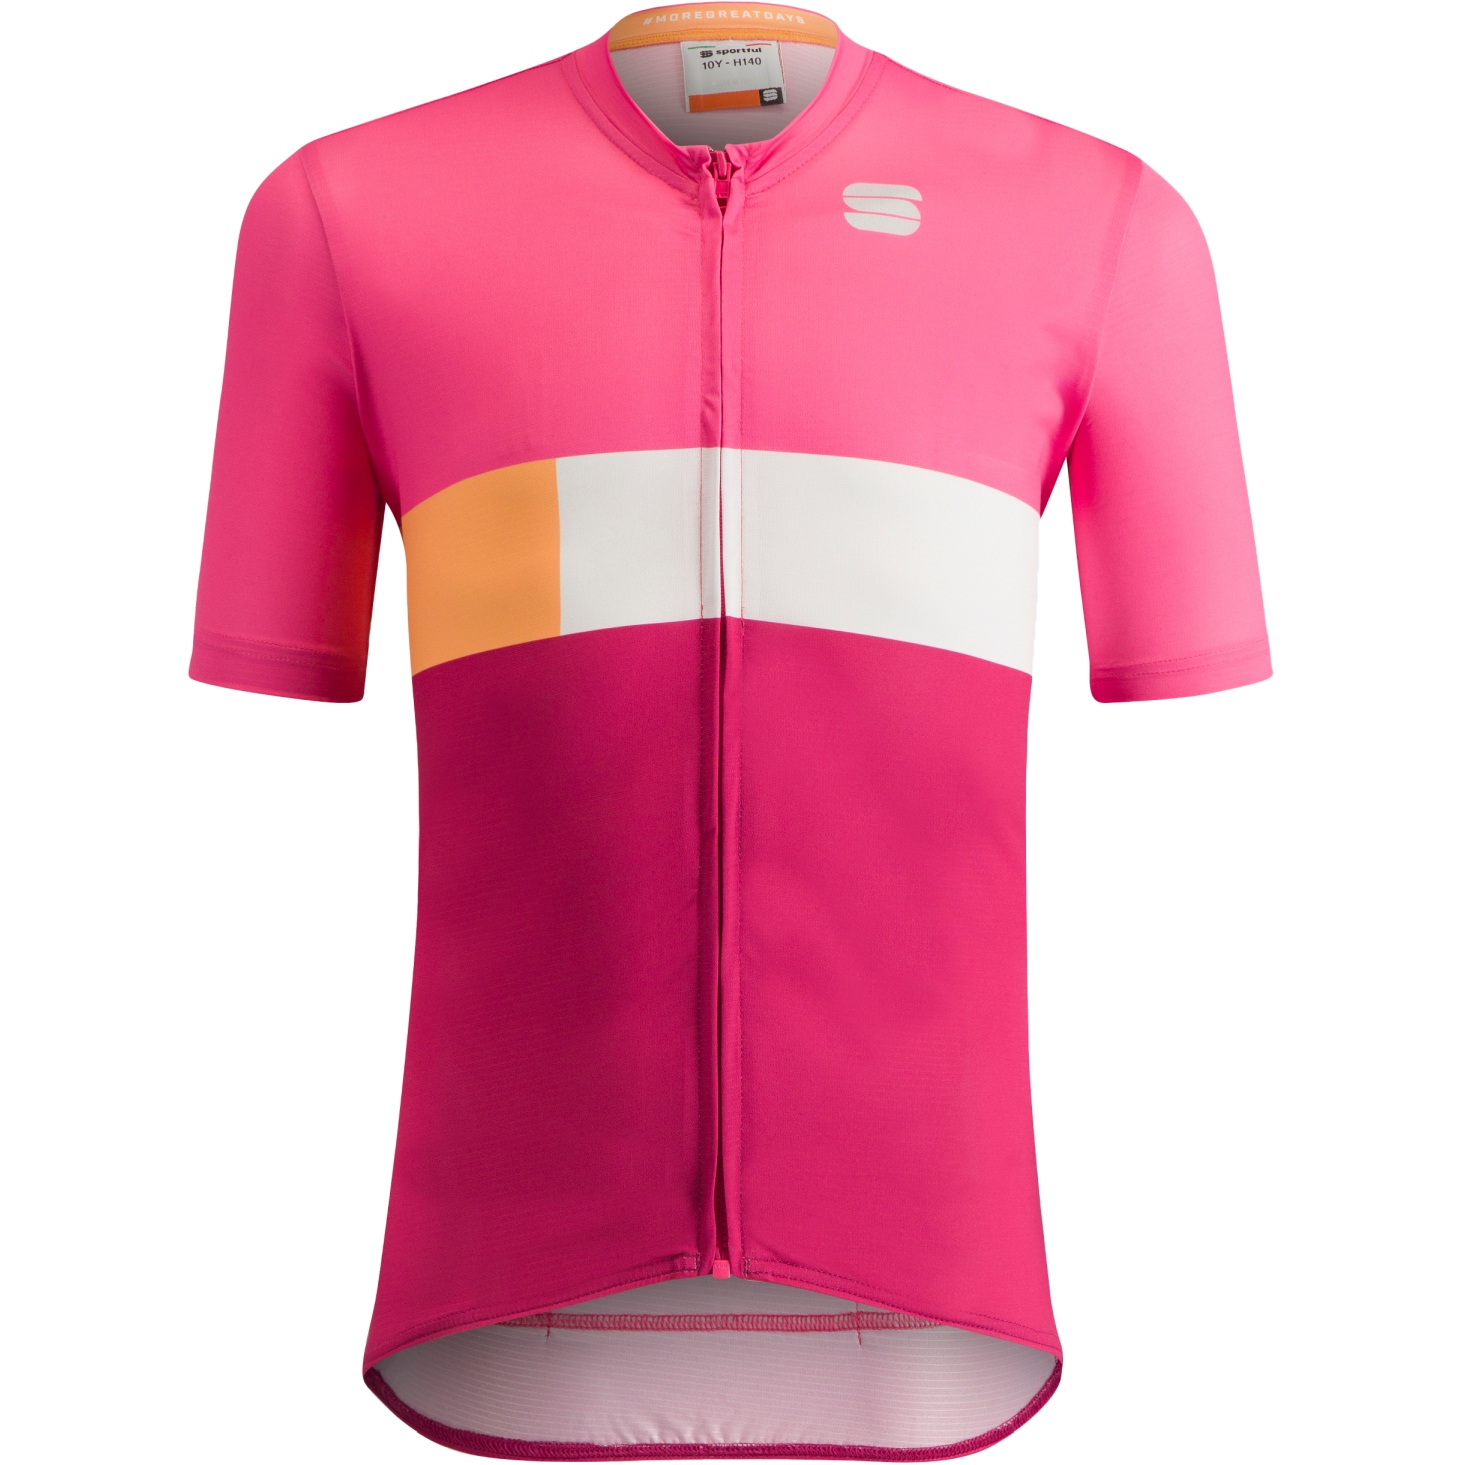 Picture of Sportful Snap Jersey Kids - 579 Carmine Rose Cyclamine